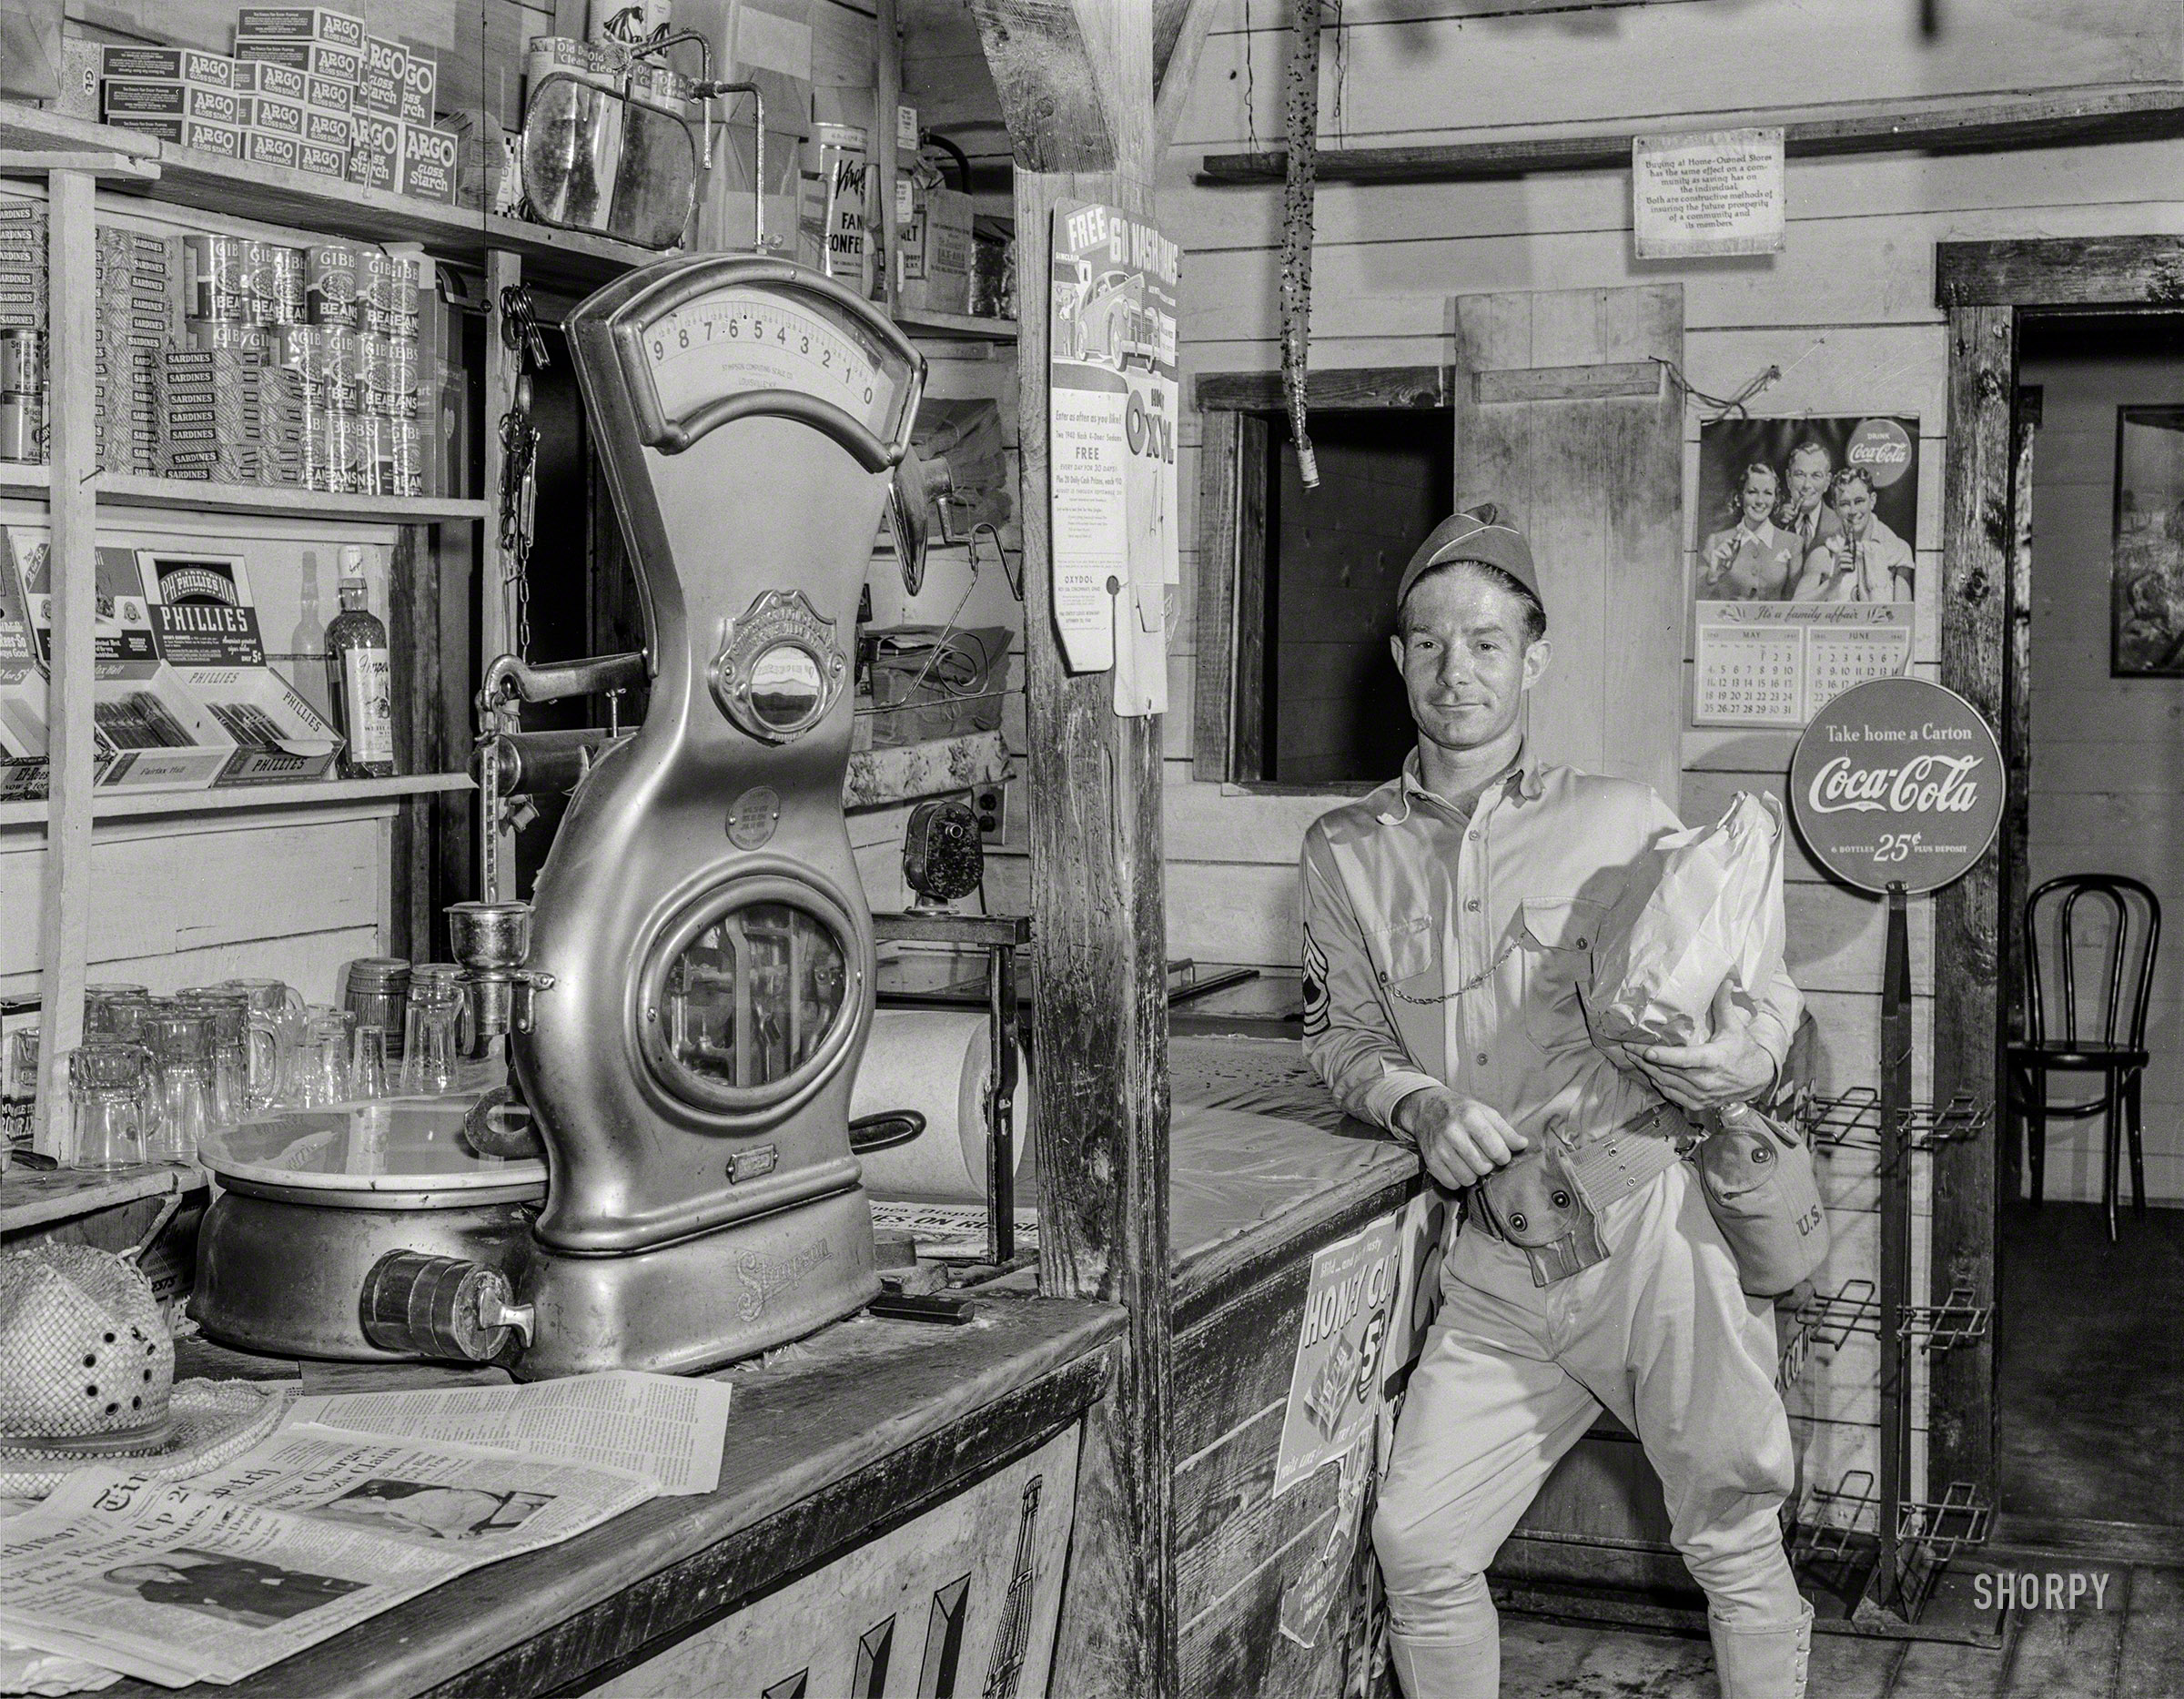 June 1941. "In the area being taken over by the Army -- Caroline County, Virginia. Most of the customers at this store are now soldiers. Many of the people in the area have already moved out and the owners of the store are making plans to move." Medium format acetate negative by Jack Delano. View full size.